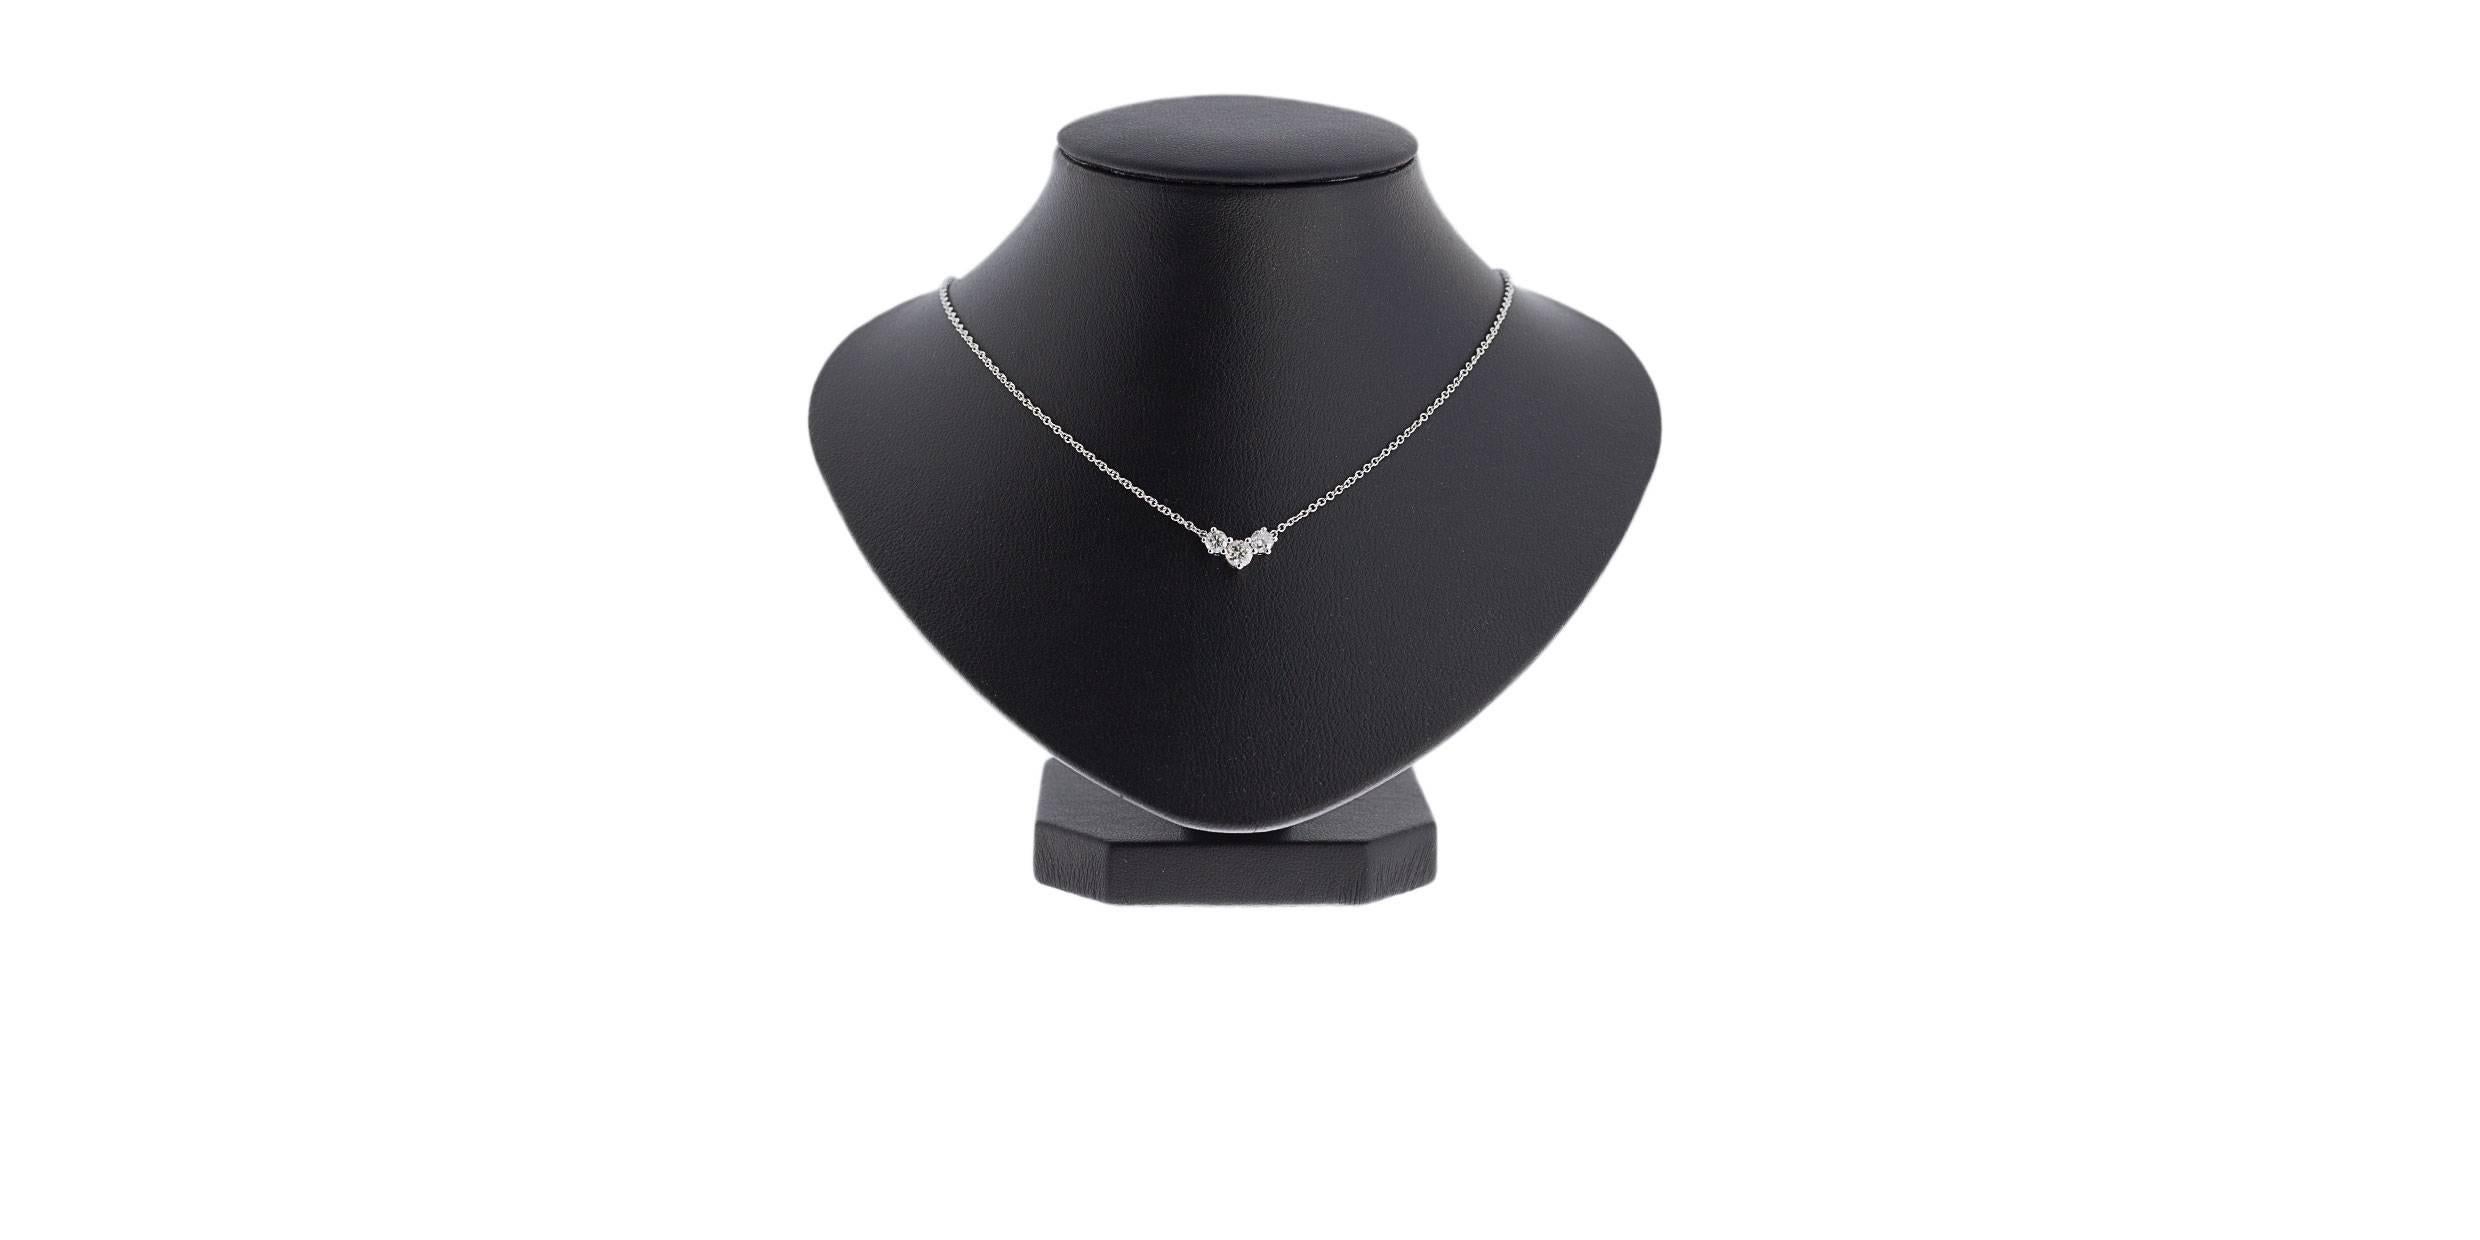 Simple yet elegant & beautiful would be the best way to describe this stunning necklace! It features 3 sparkly, round brilliant cut diamonds with a combined total weight of .50 carat. These diamonds grade as HI/SI2 in quality. They are shared